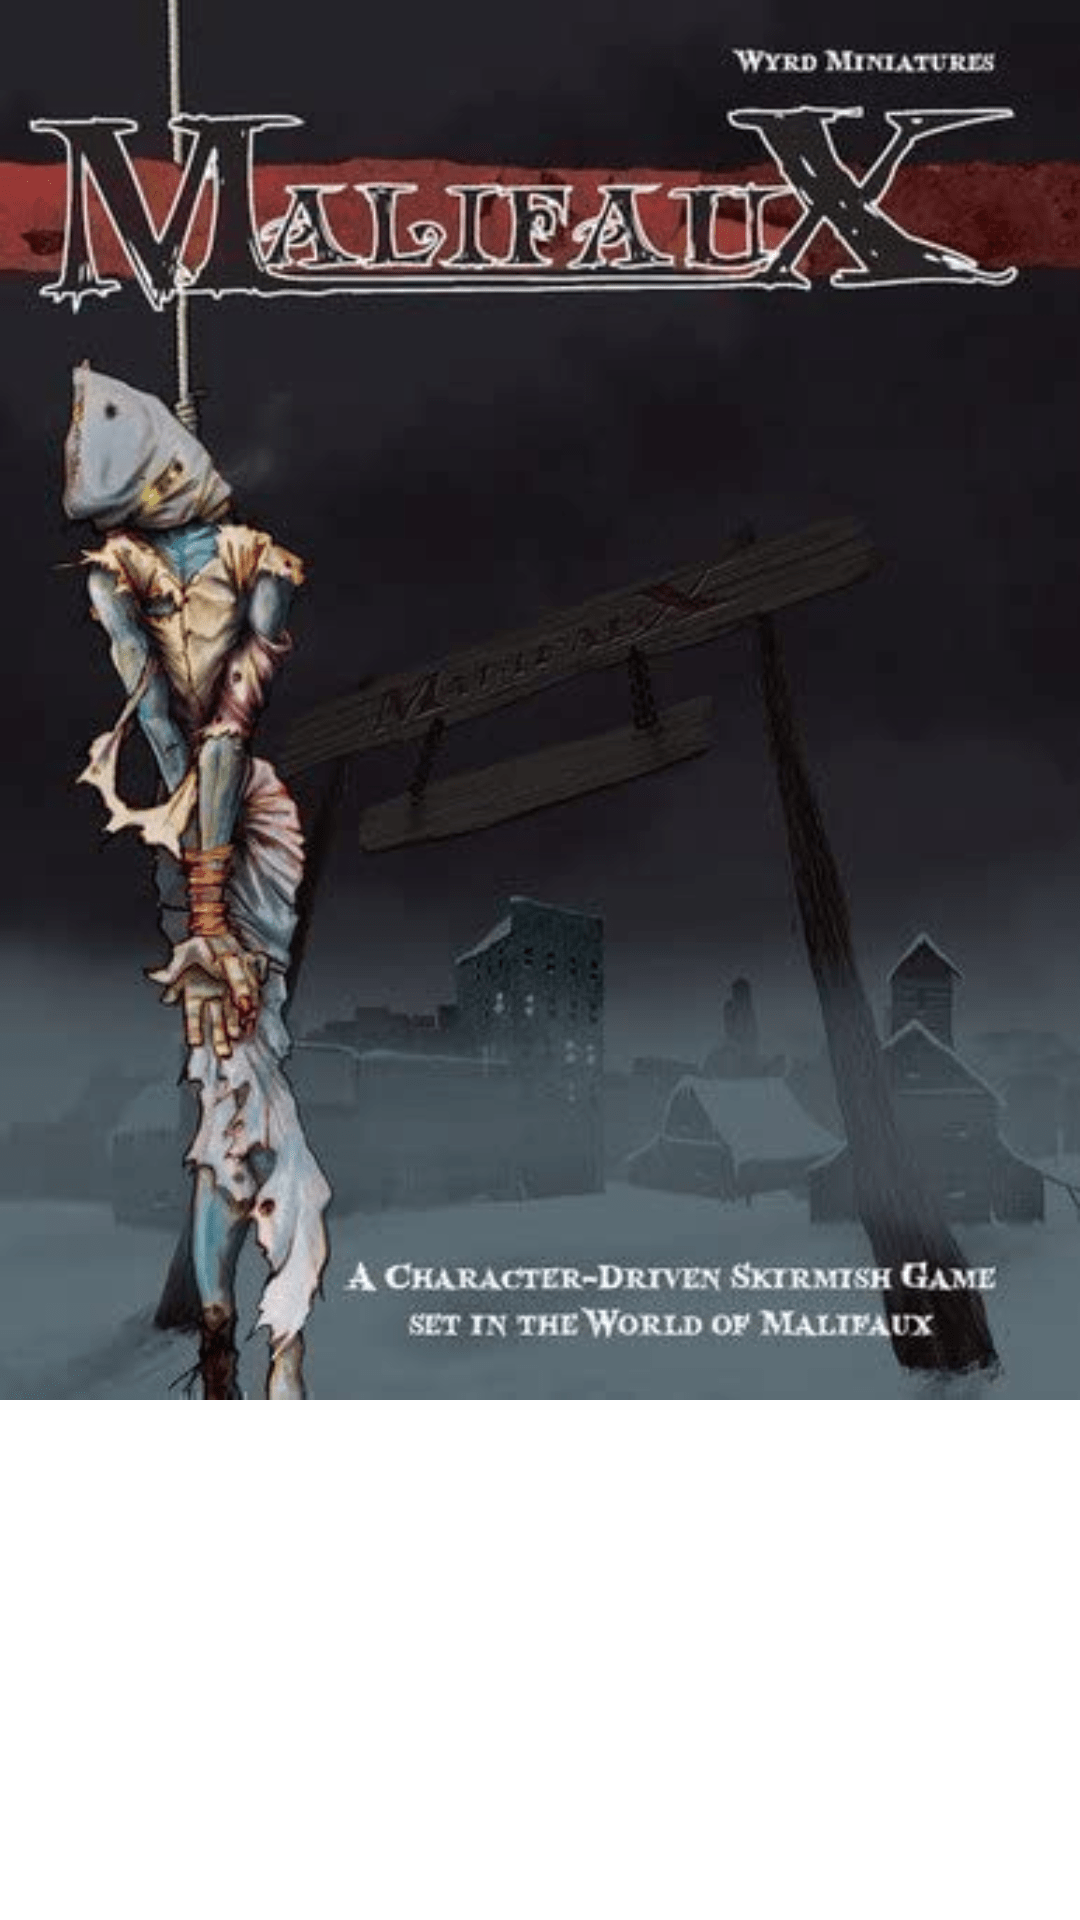 Malifaux - A Character-Driven Skirmish Game Set in the World of Malifaux